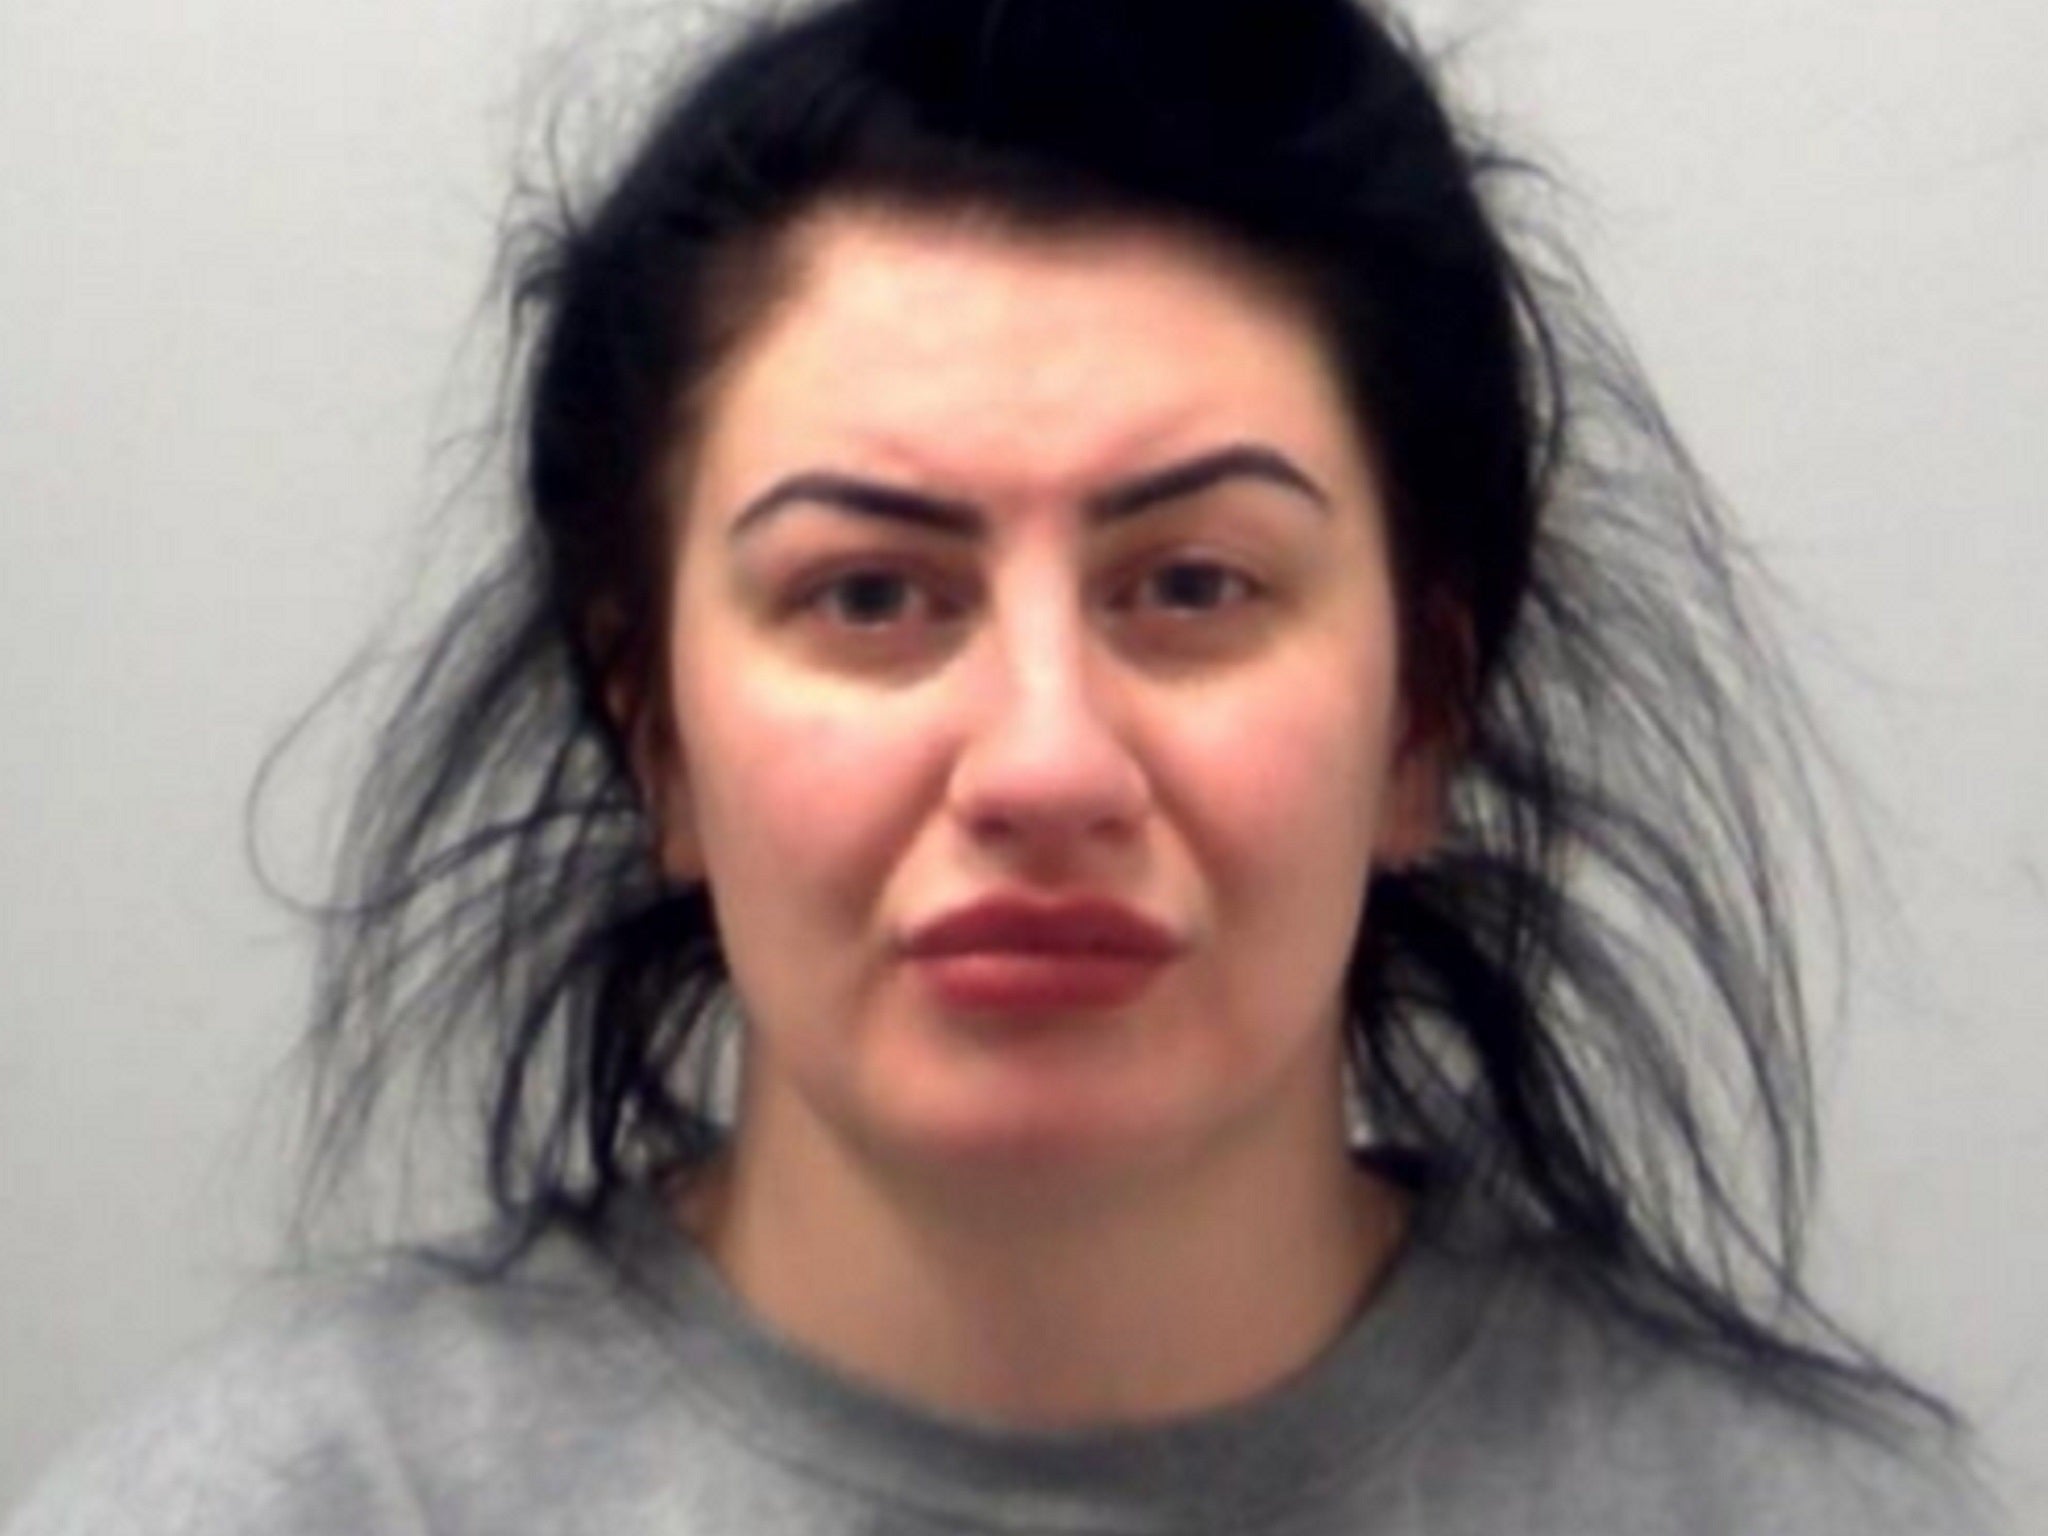 Hannah Sindrey, 24, has been jailed for life after stabbing her boyfriend Paul Fletcher to death during a New Year’s Eve party